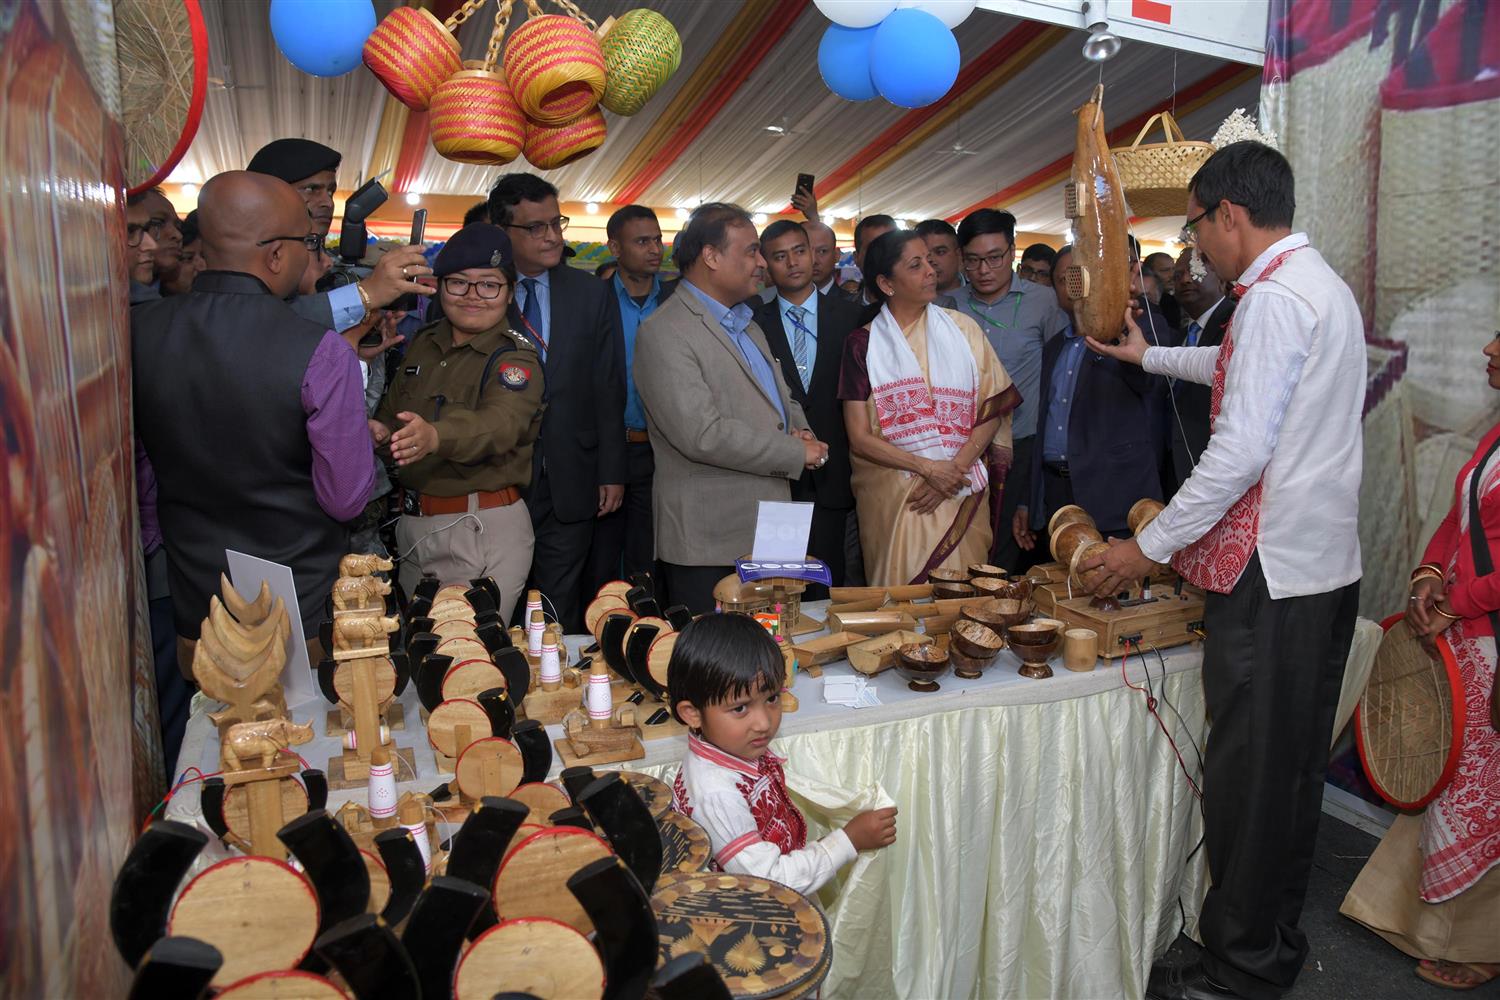 Union Minister of Finance & Corporate Affairs Smt. Nirmala Sitharaman, visiting the exhibition stalls put up by  NGOs at the venue of Bankers meets  at  Khanapara, Guwahati on 27th February 2020. 

